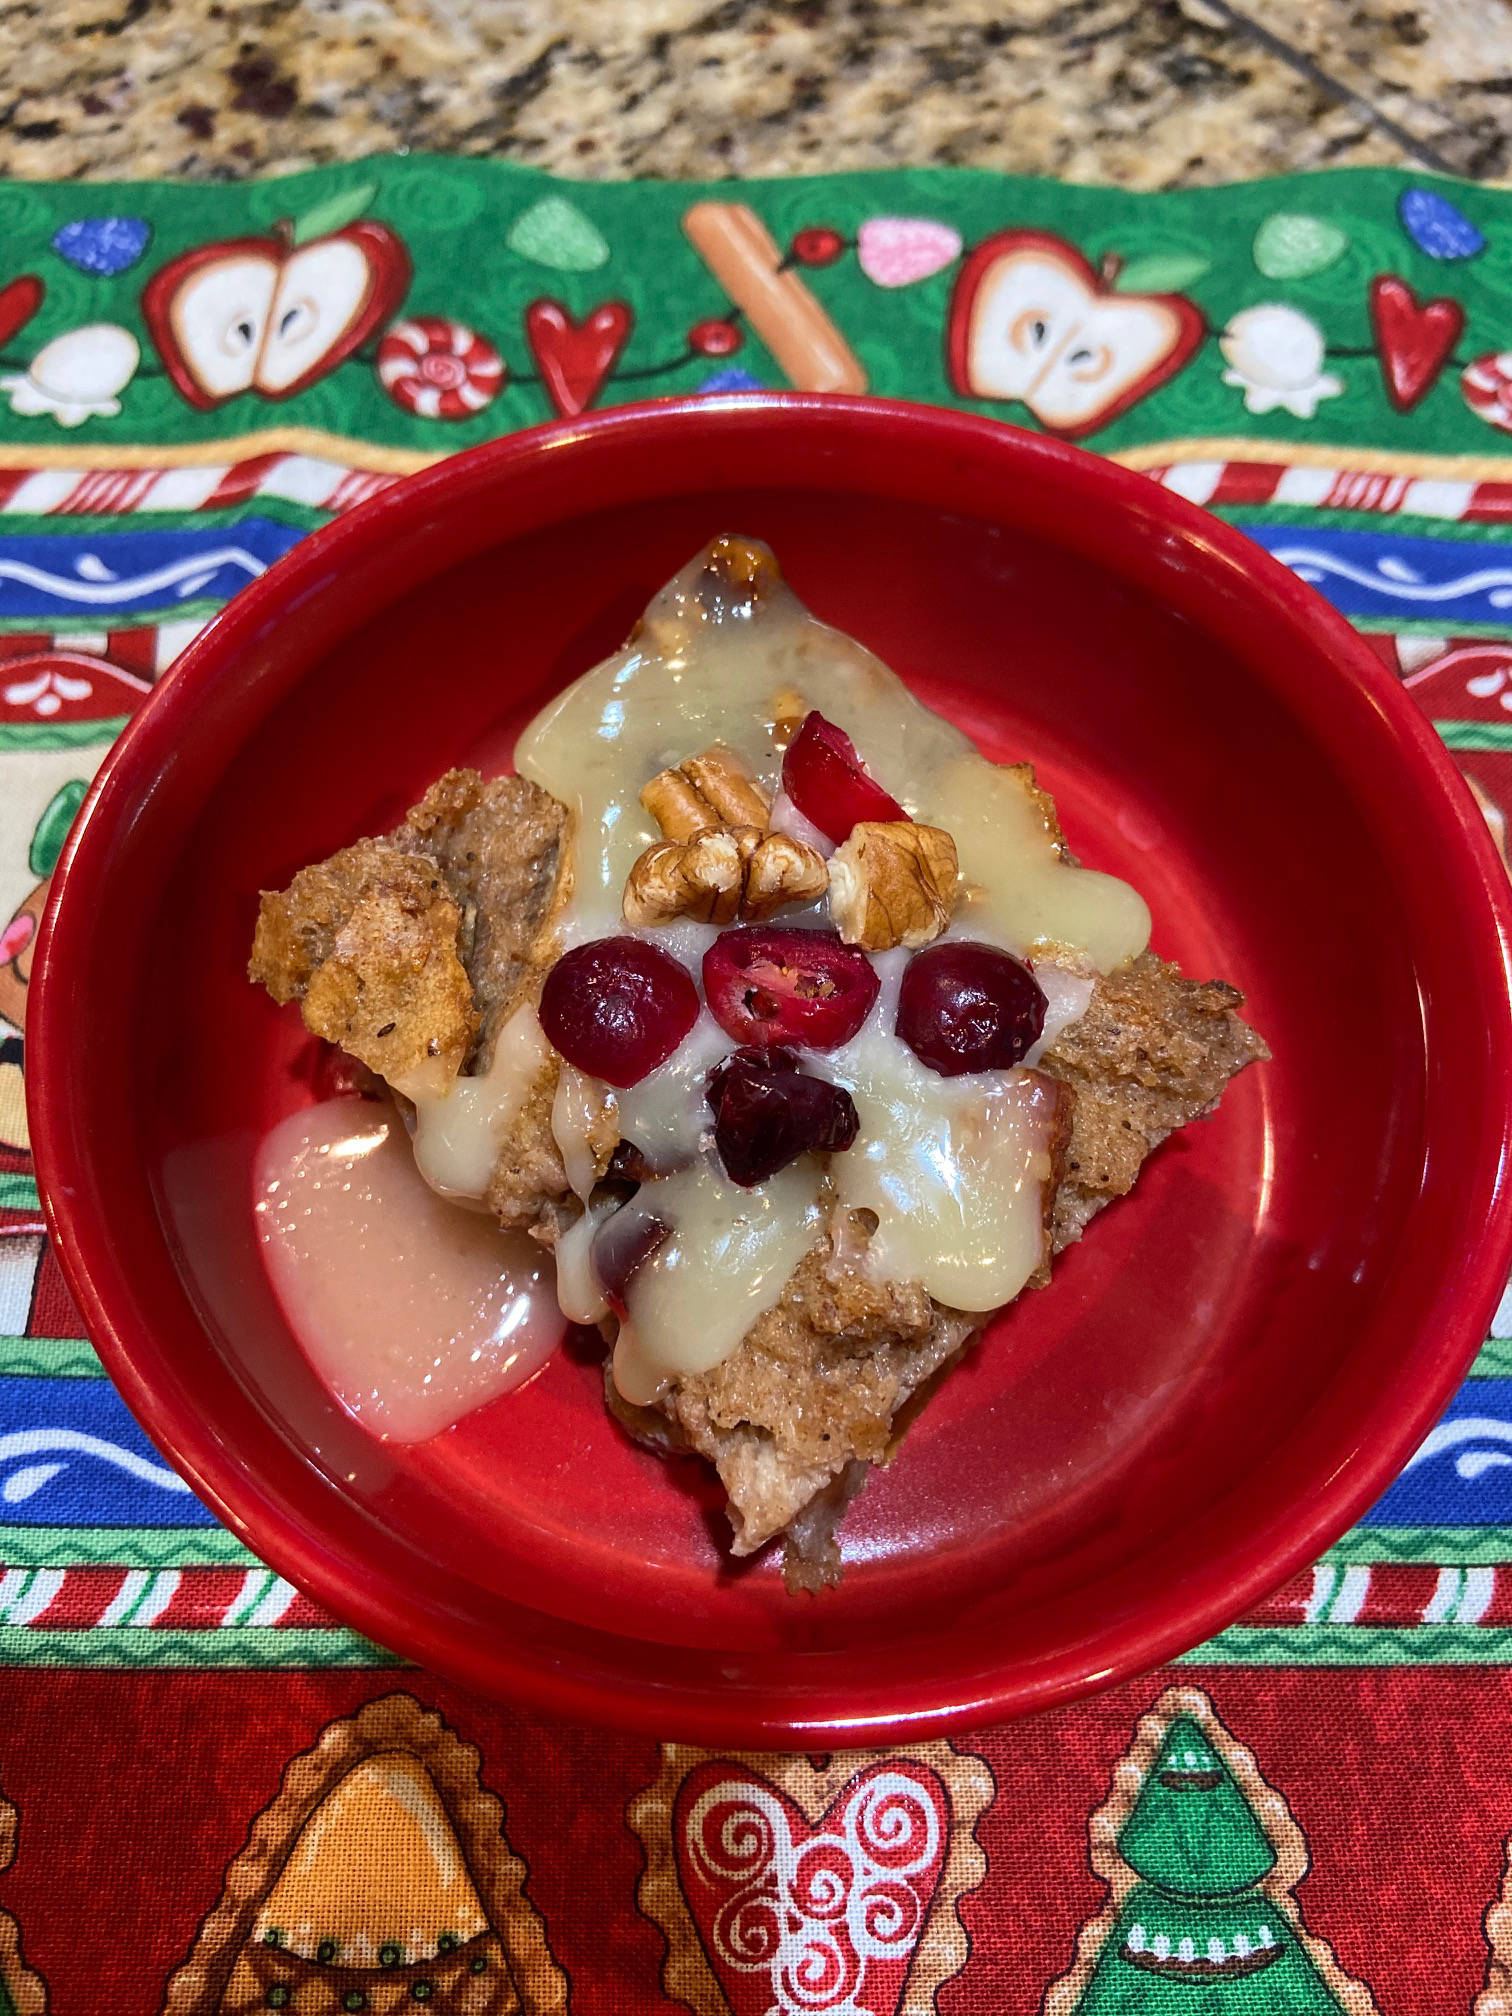 Cranberry amaretto bread pudding can be a festive way to end a holiday meal. Teri Robl made this recipe on Nov. 26, 2019, in her Homer, Alaska, kitchen. (Photo by Teri Robl)